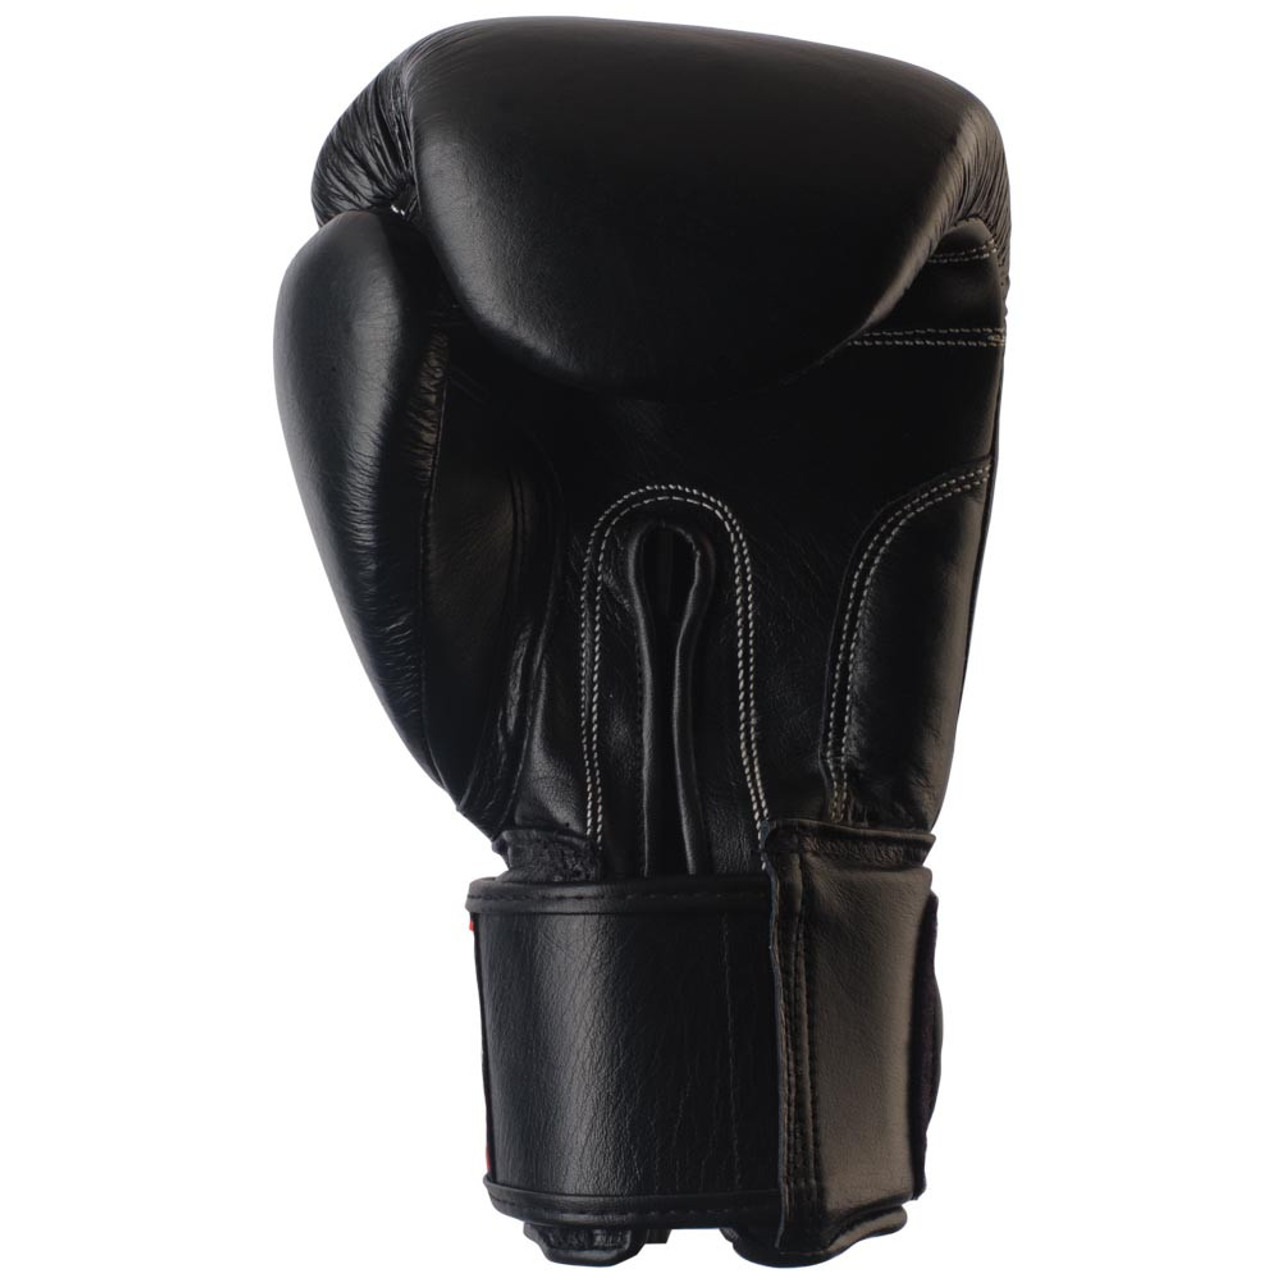 Original Leather Boxing Gloves | Order Boxing Gloves from Revgear